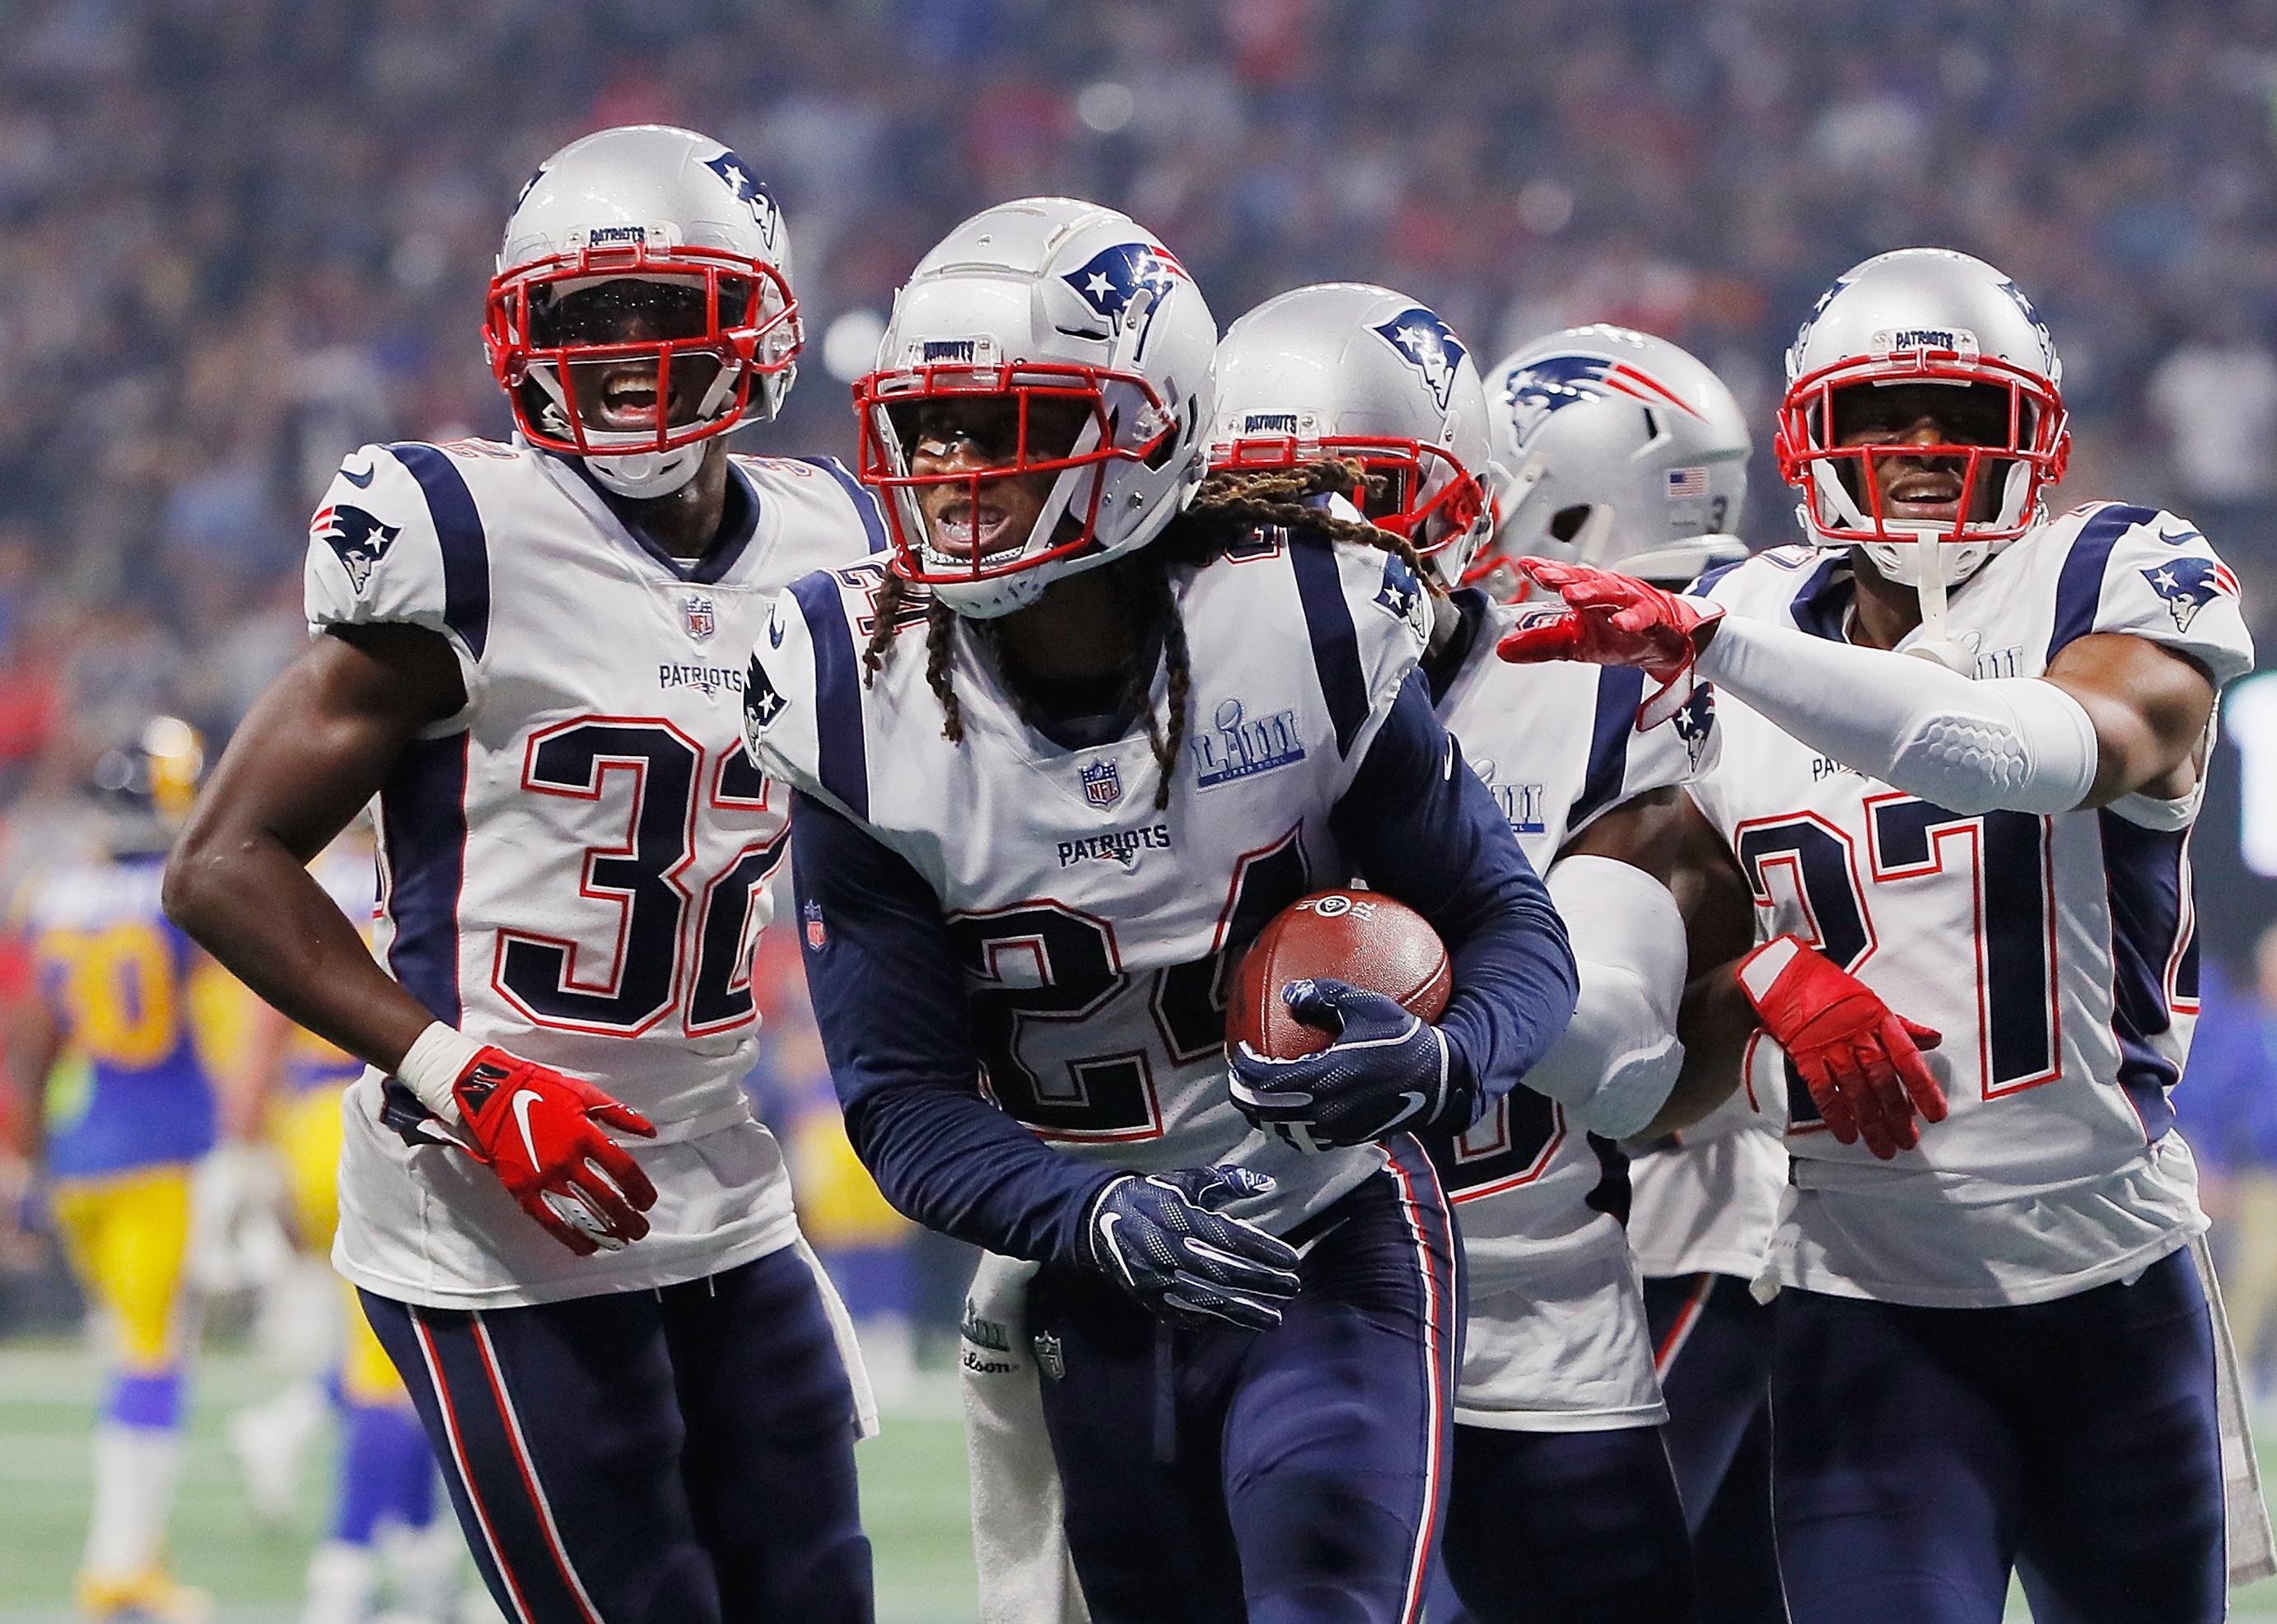 The New England Patriots celebrate with Stephon Gilmore after he made an interception.